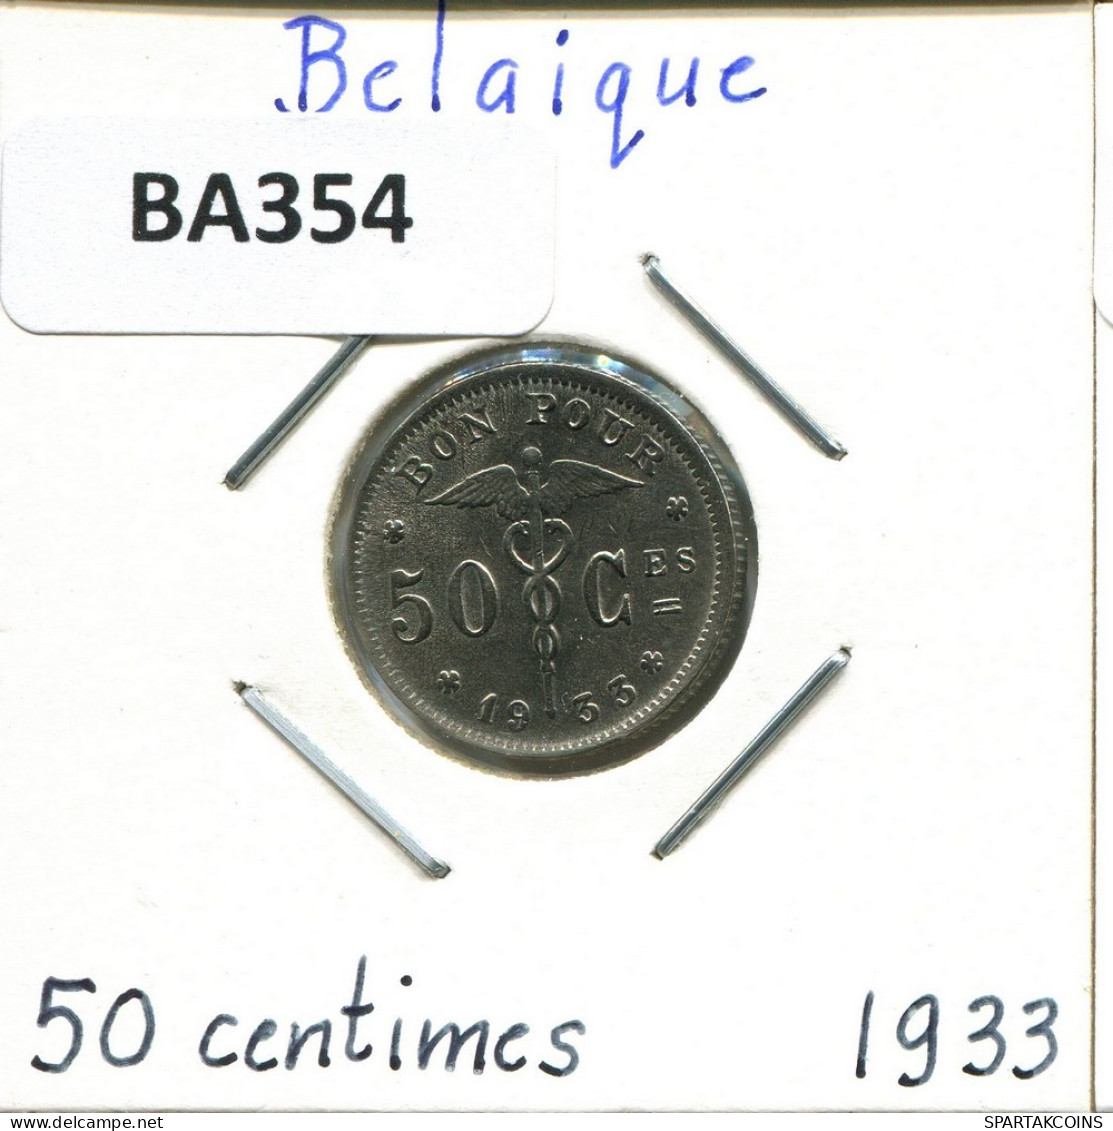 50 CENTIMES 1933 FRENCH Text BELGIUM Coin #BA354.U.A - 50 Cent